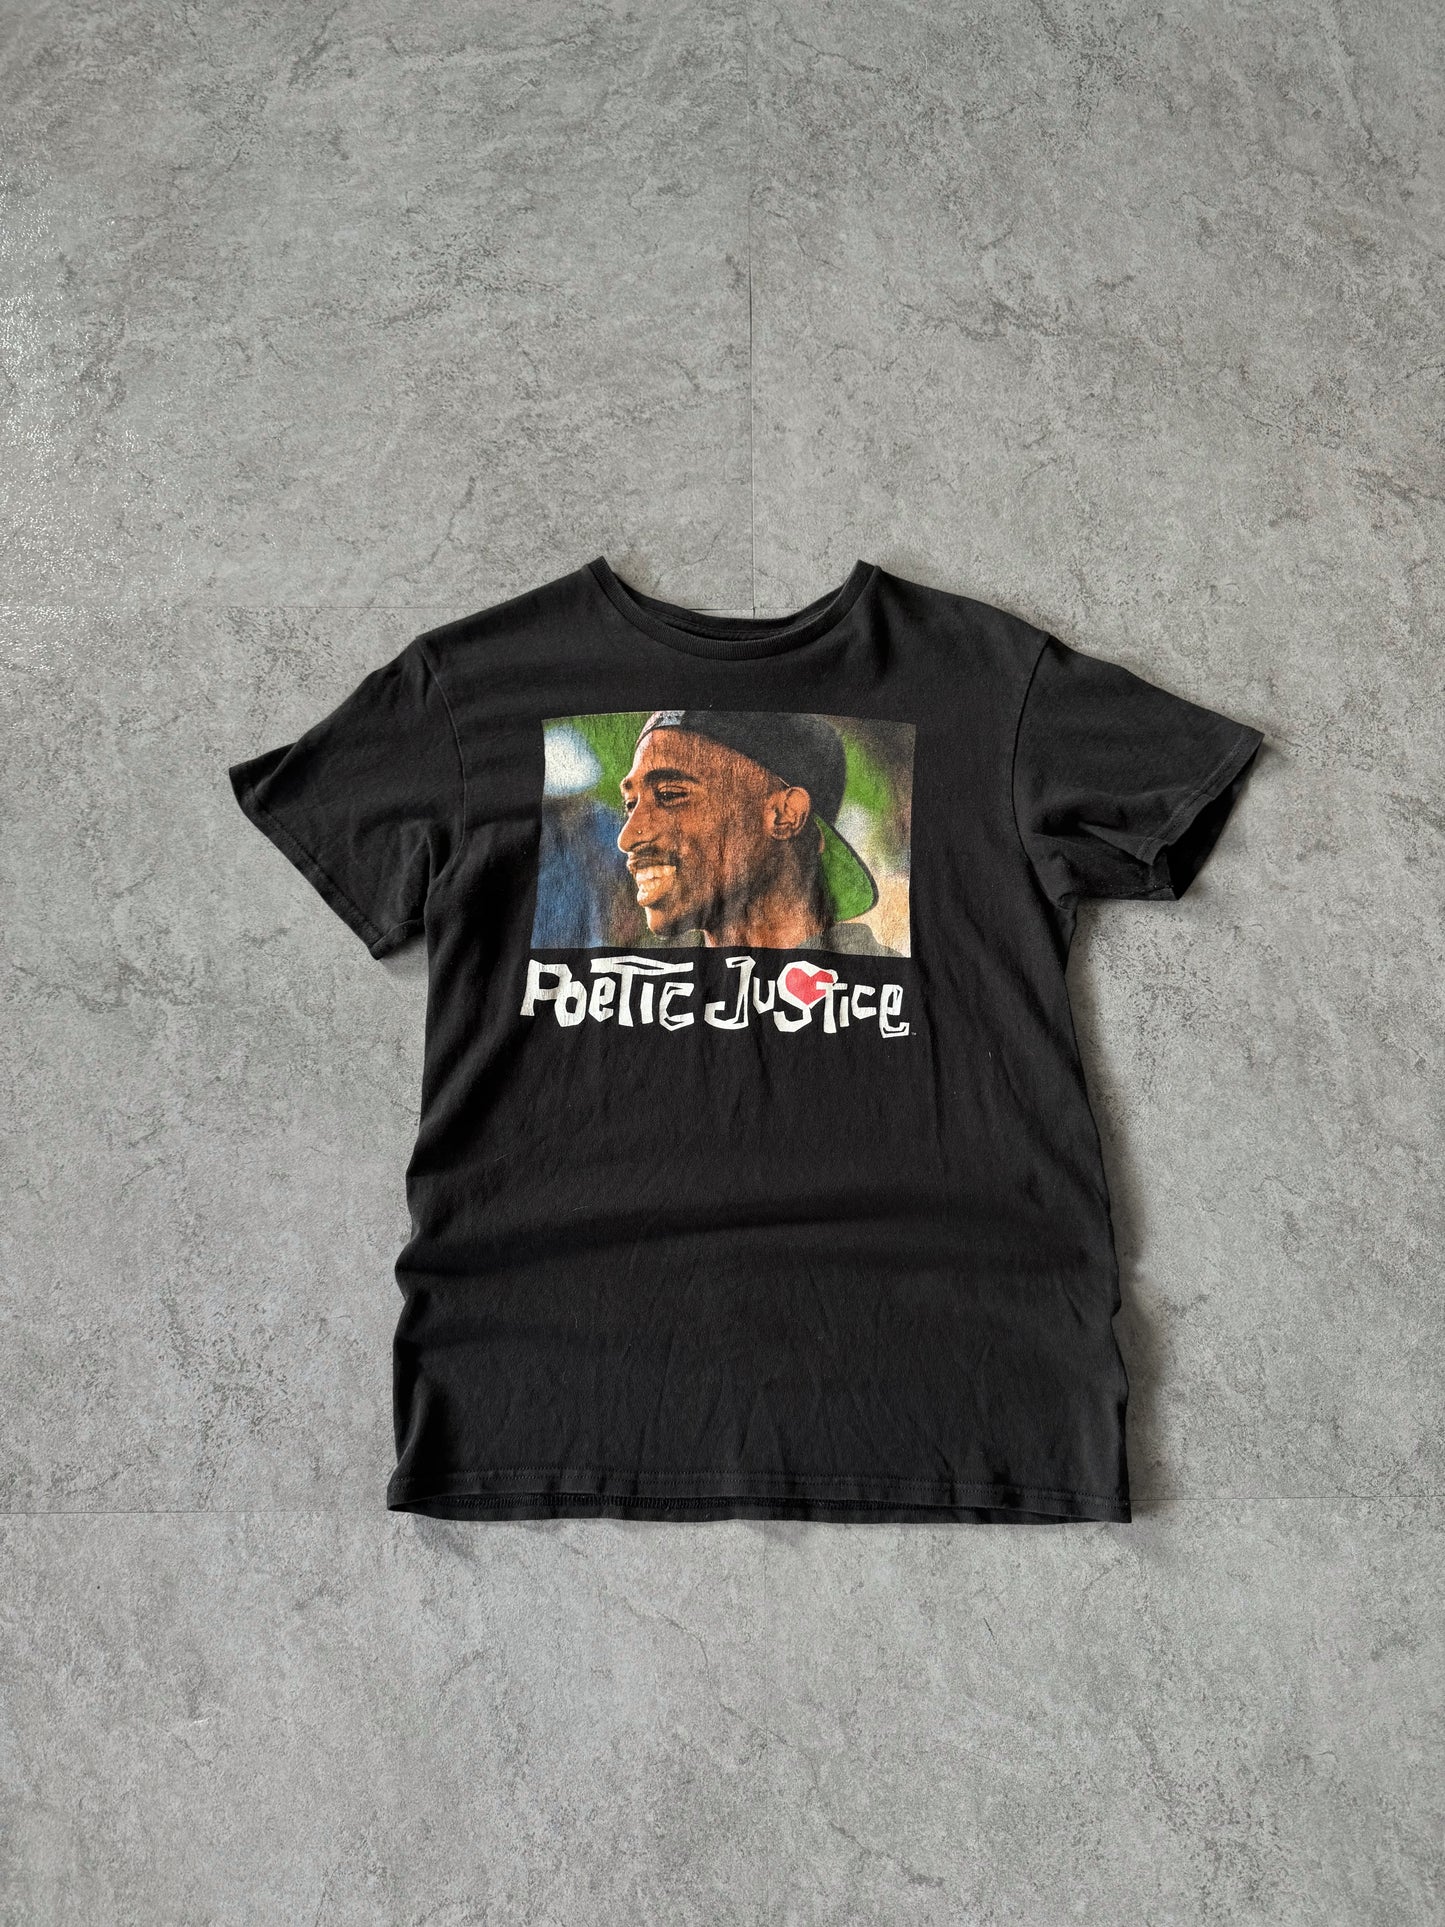 (S) Poetic Justice 2pac Tee